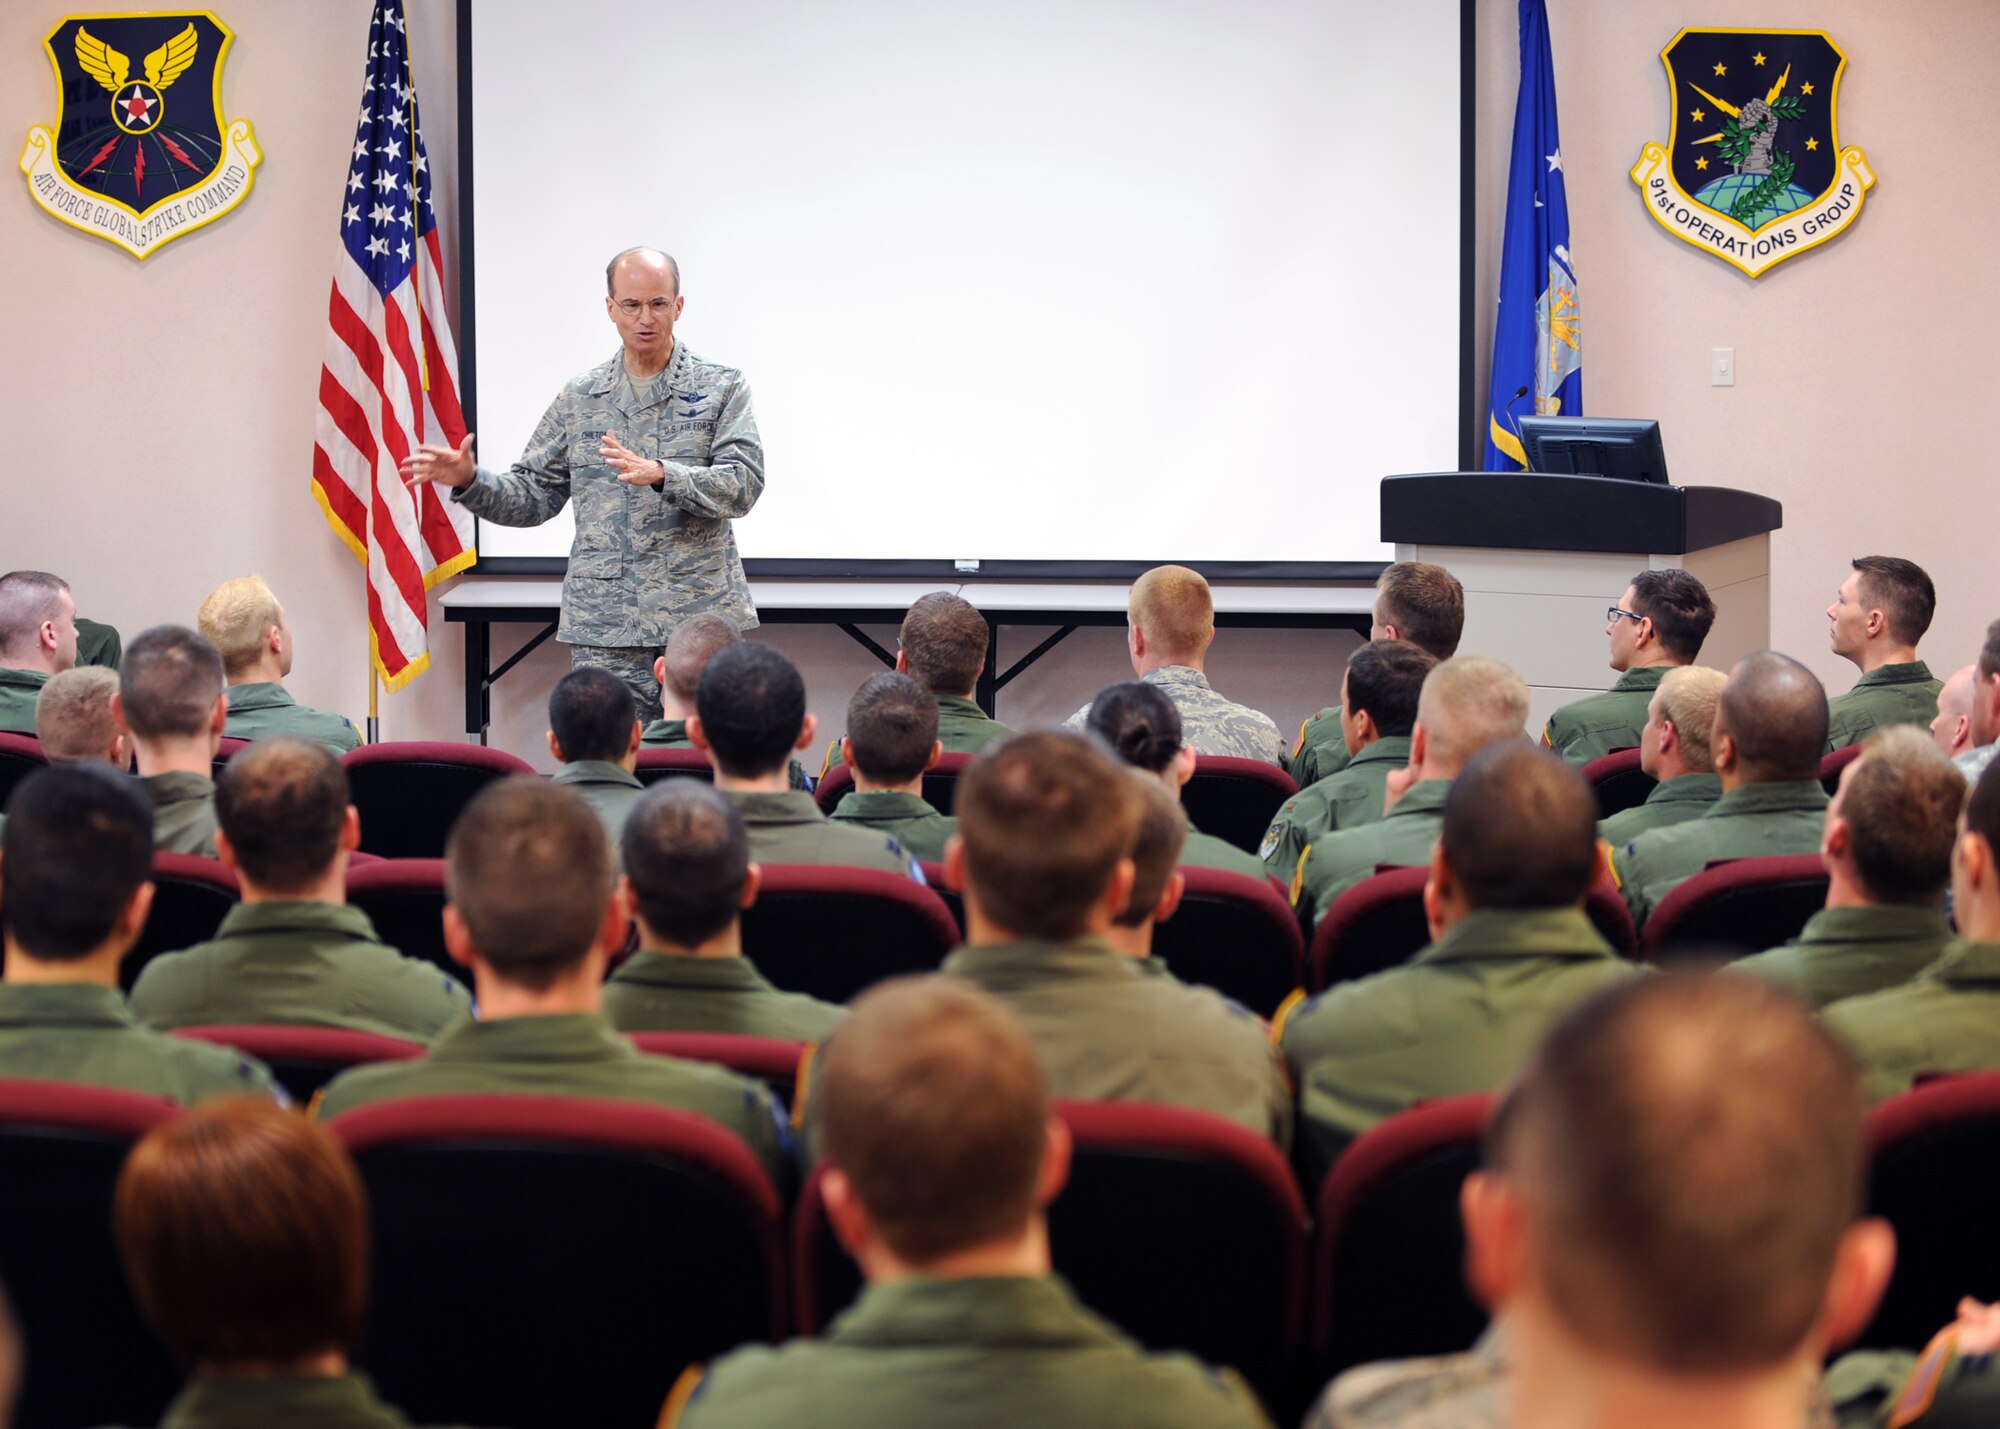 MINOT AIR FORCE BASE, N.D. -- Gen. Kevin P. Chilton, United States Strategic Command commander, visits with members of the 740th, 741st and 742nd Missile Squadrons in their morning briefing before they depart for their duty day here April 20. General Chilton’s visit was one of encouragement to the men and women of Minot AFB and to personally thank them for the sacrifices made every day in the defense of this nation. (U.S. Air Force photo by Staff Sgt. Keith Ballard)